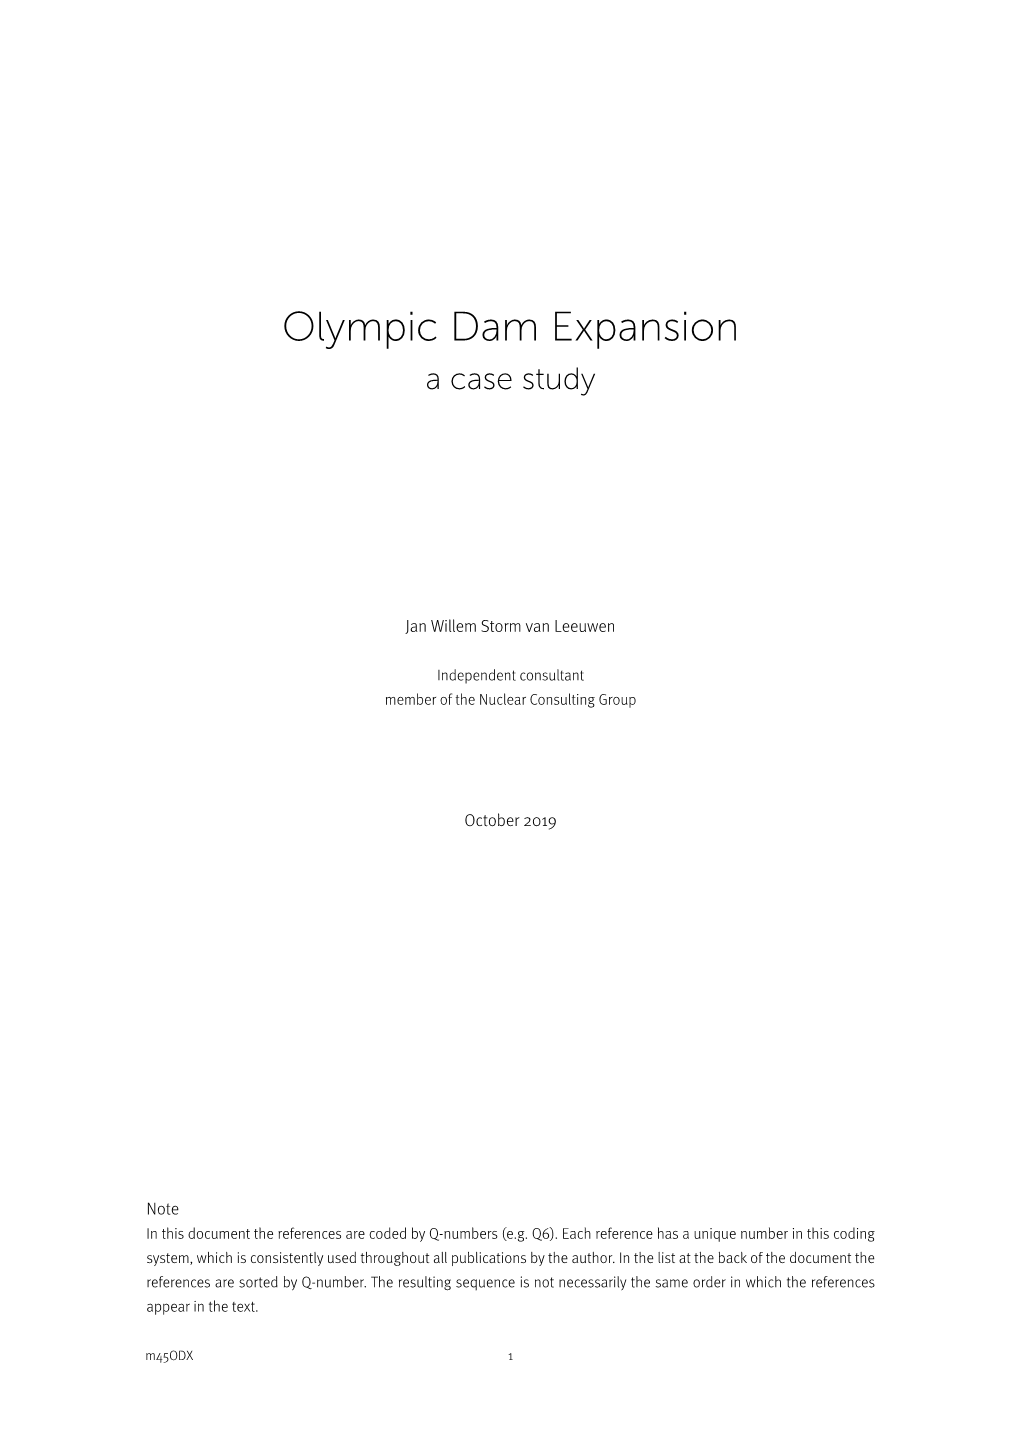 Olympic Dam Expansion a Case Study